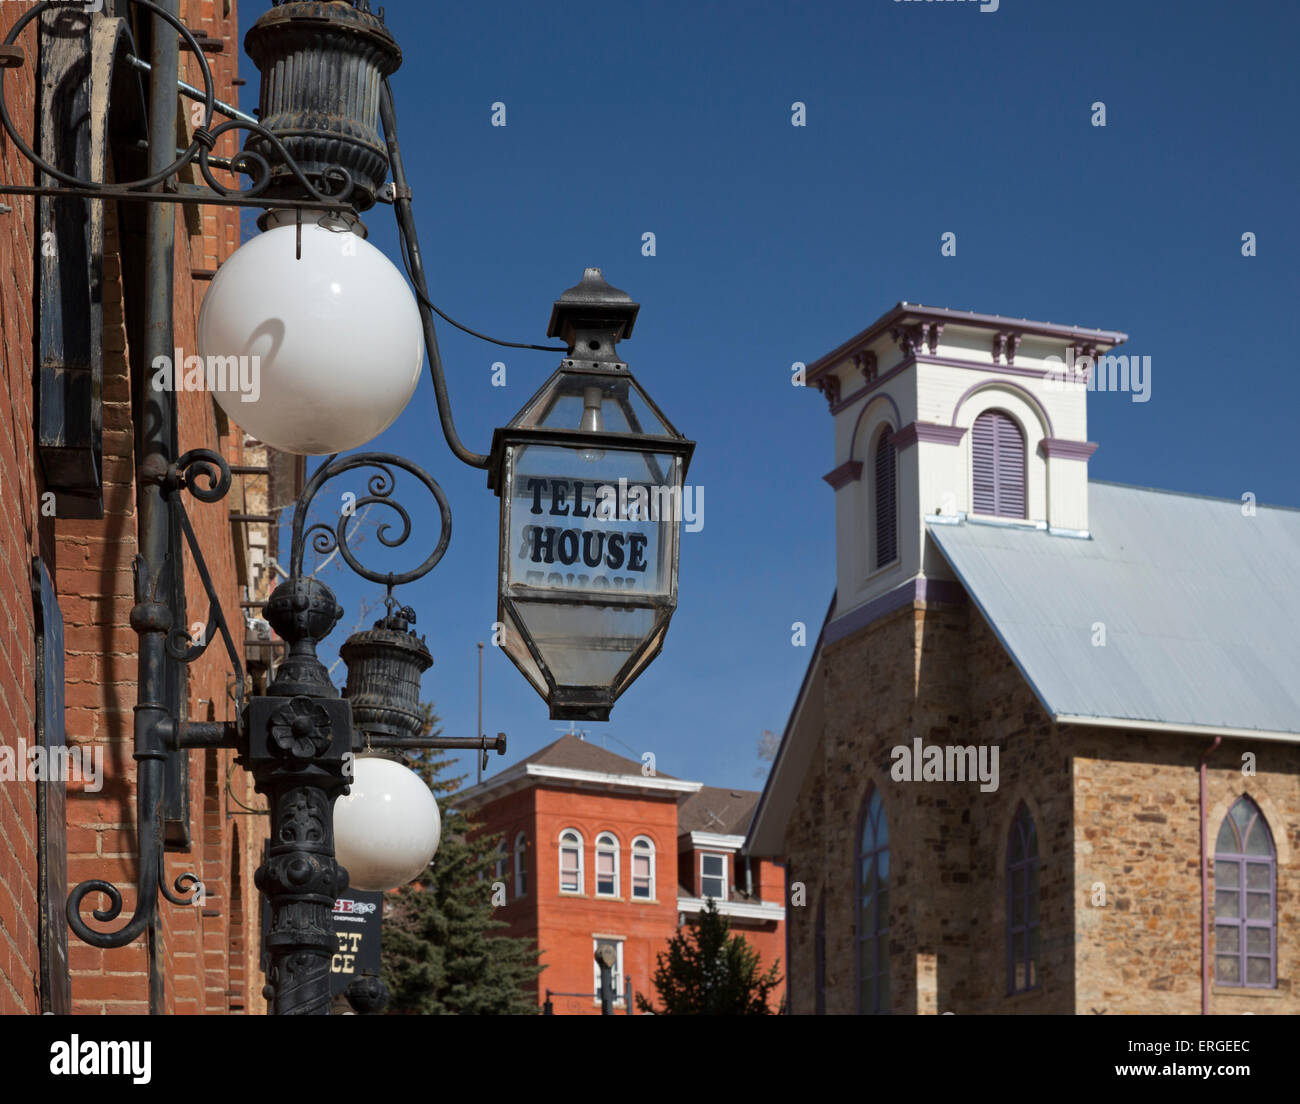 Central City, Colorado - The Teller House hotel-casino and St. James United Methodist Church in the historic district. Stock Photo